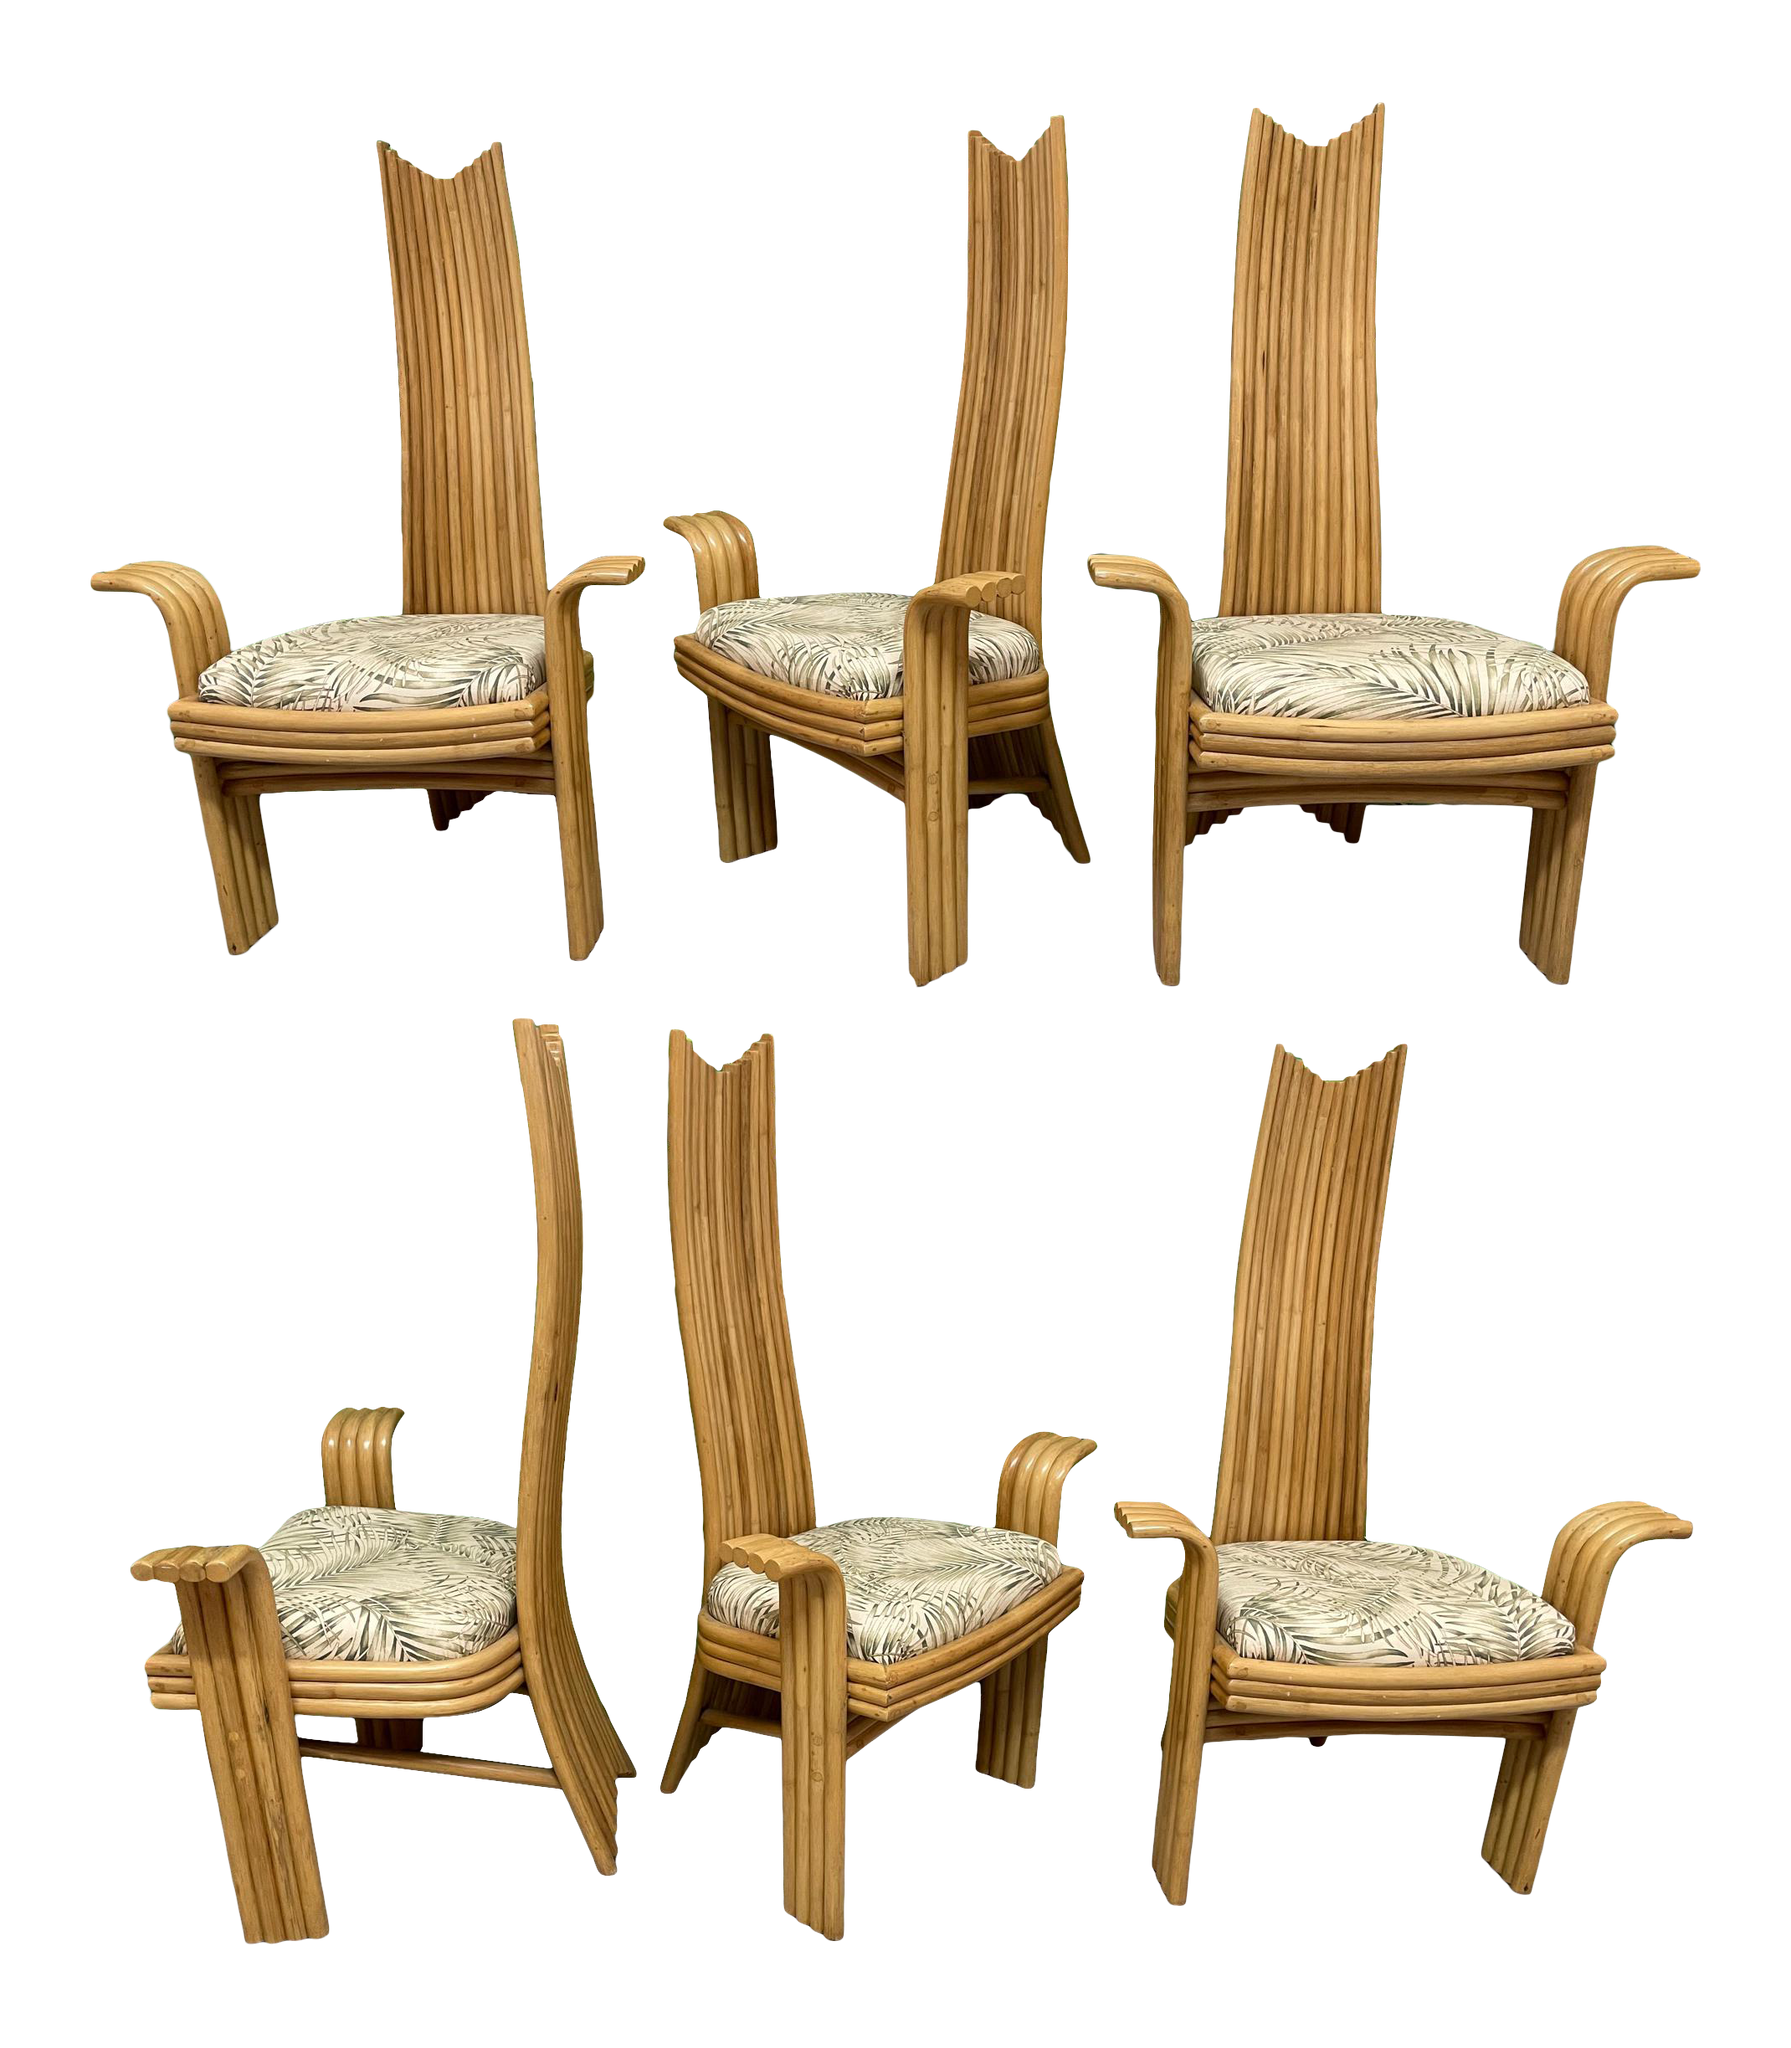 High Back Rattan Dining Chairs in the Style of Danny Ho Fong or Mackintosh